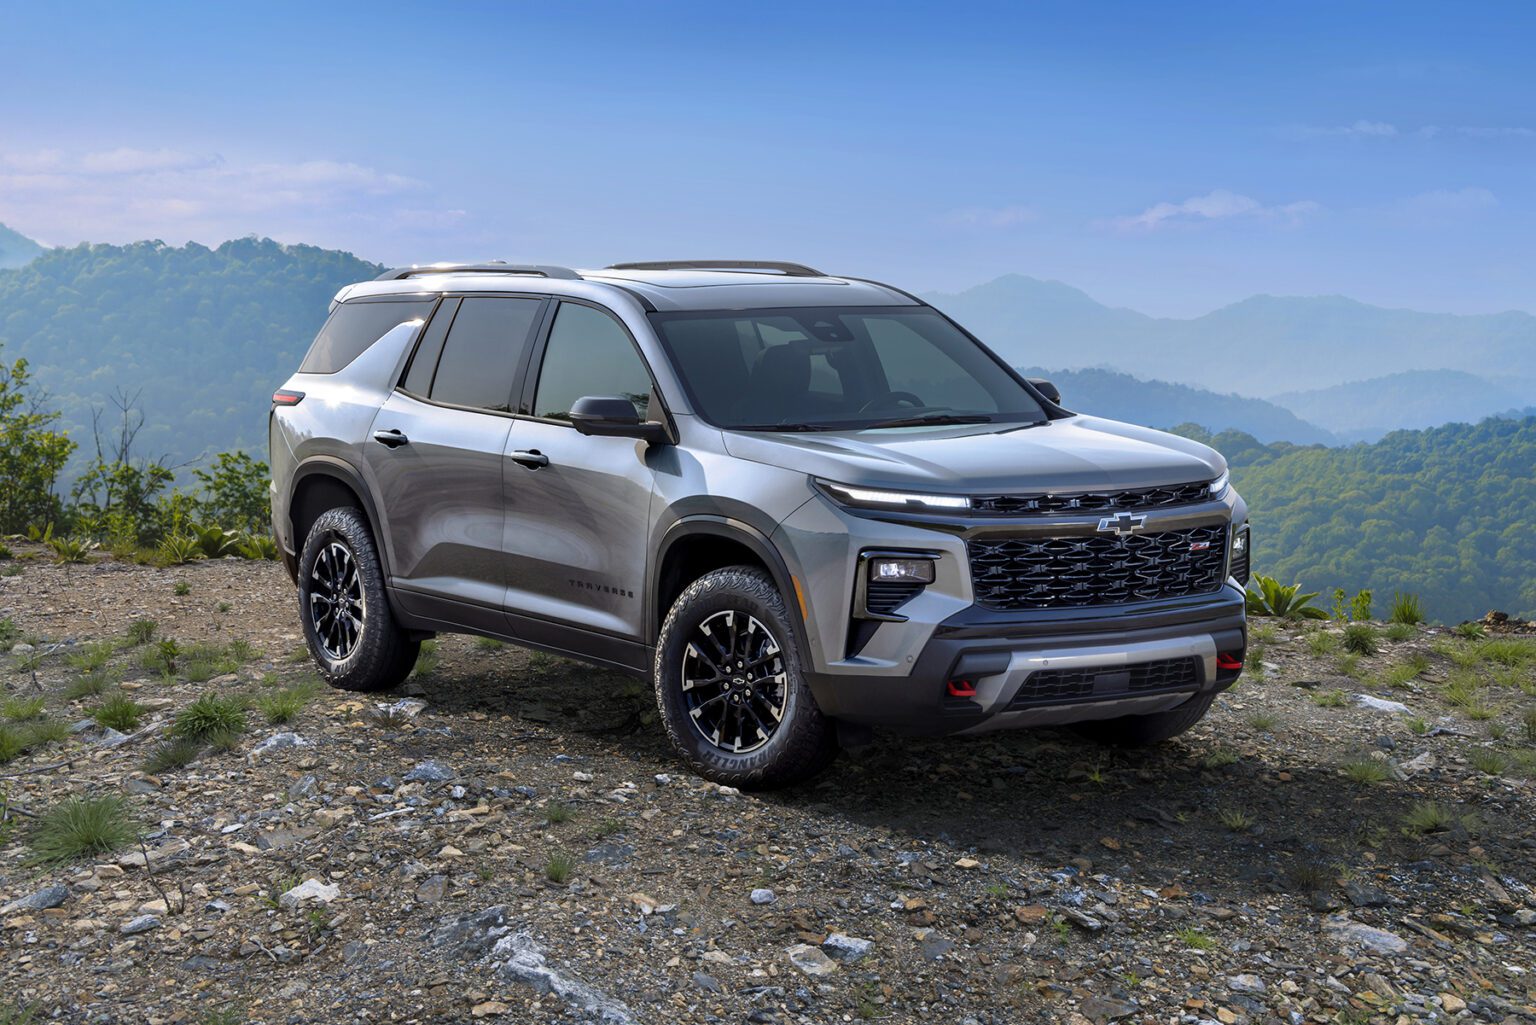 The 2020 chevrolet trailblazer is parked on a rocky mountainside.